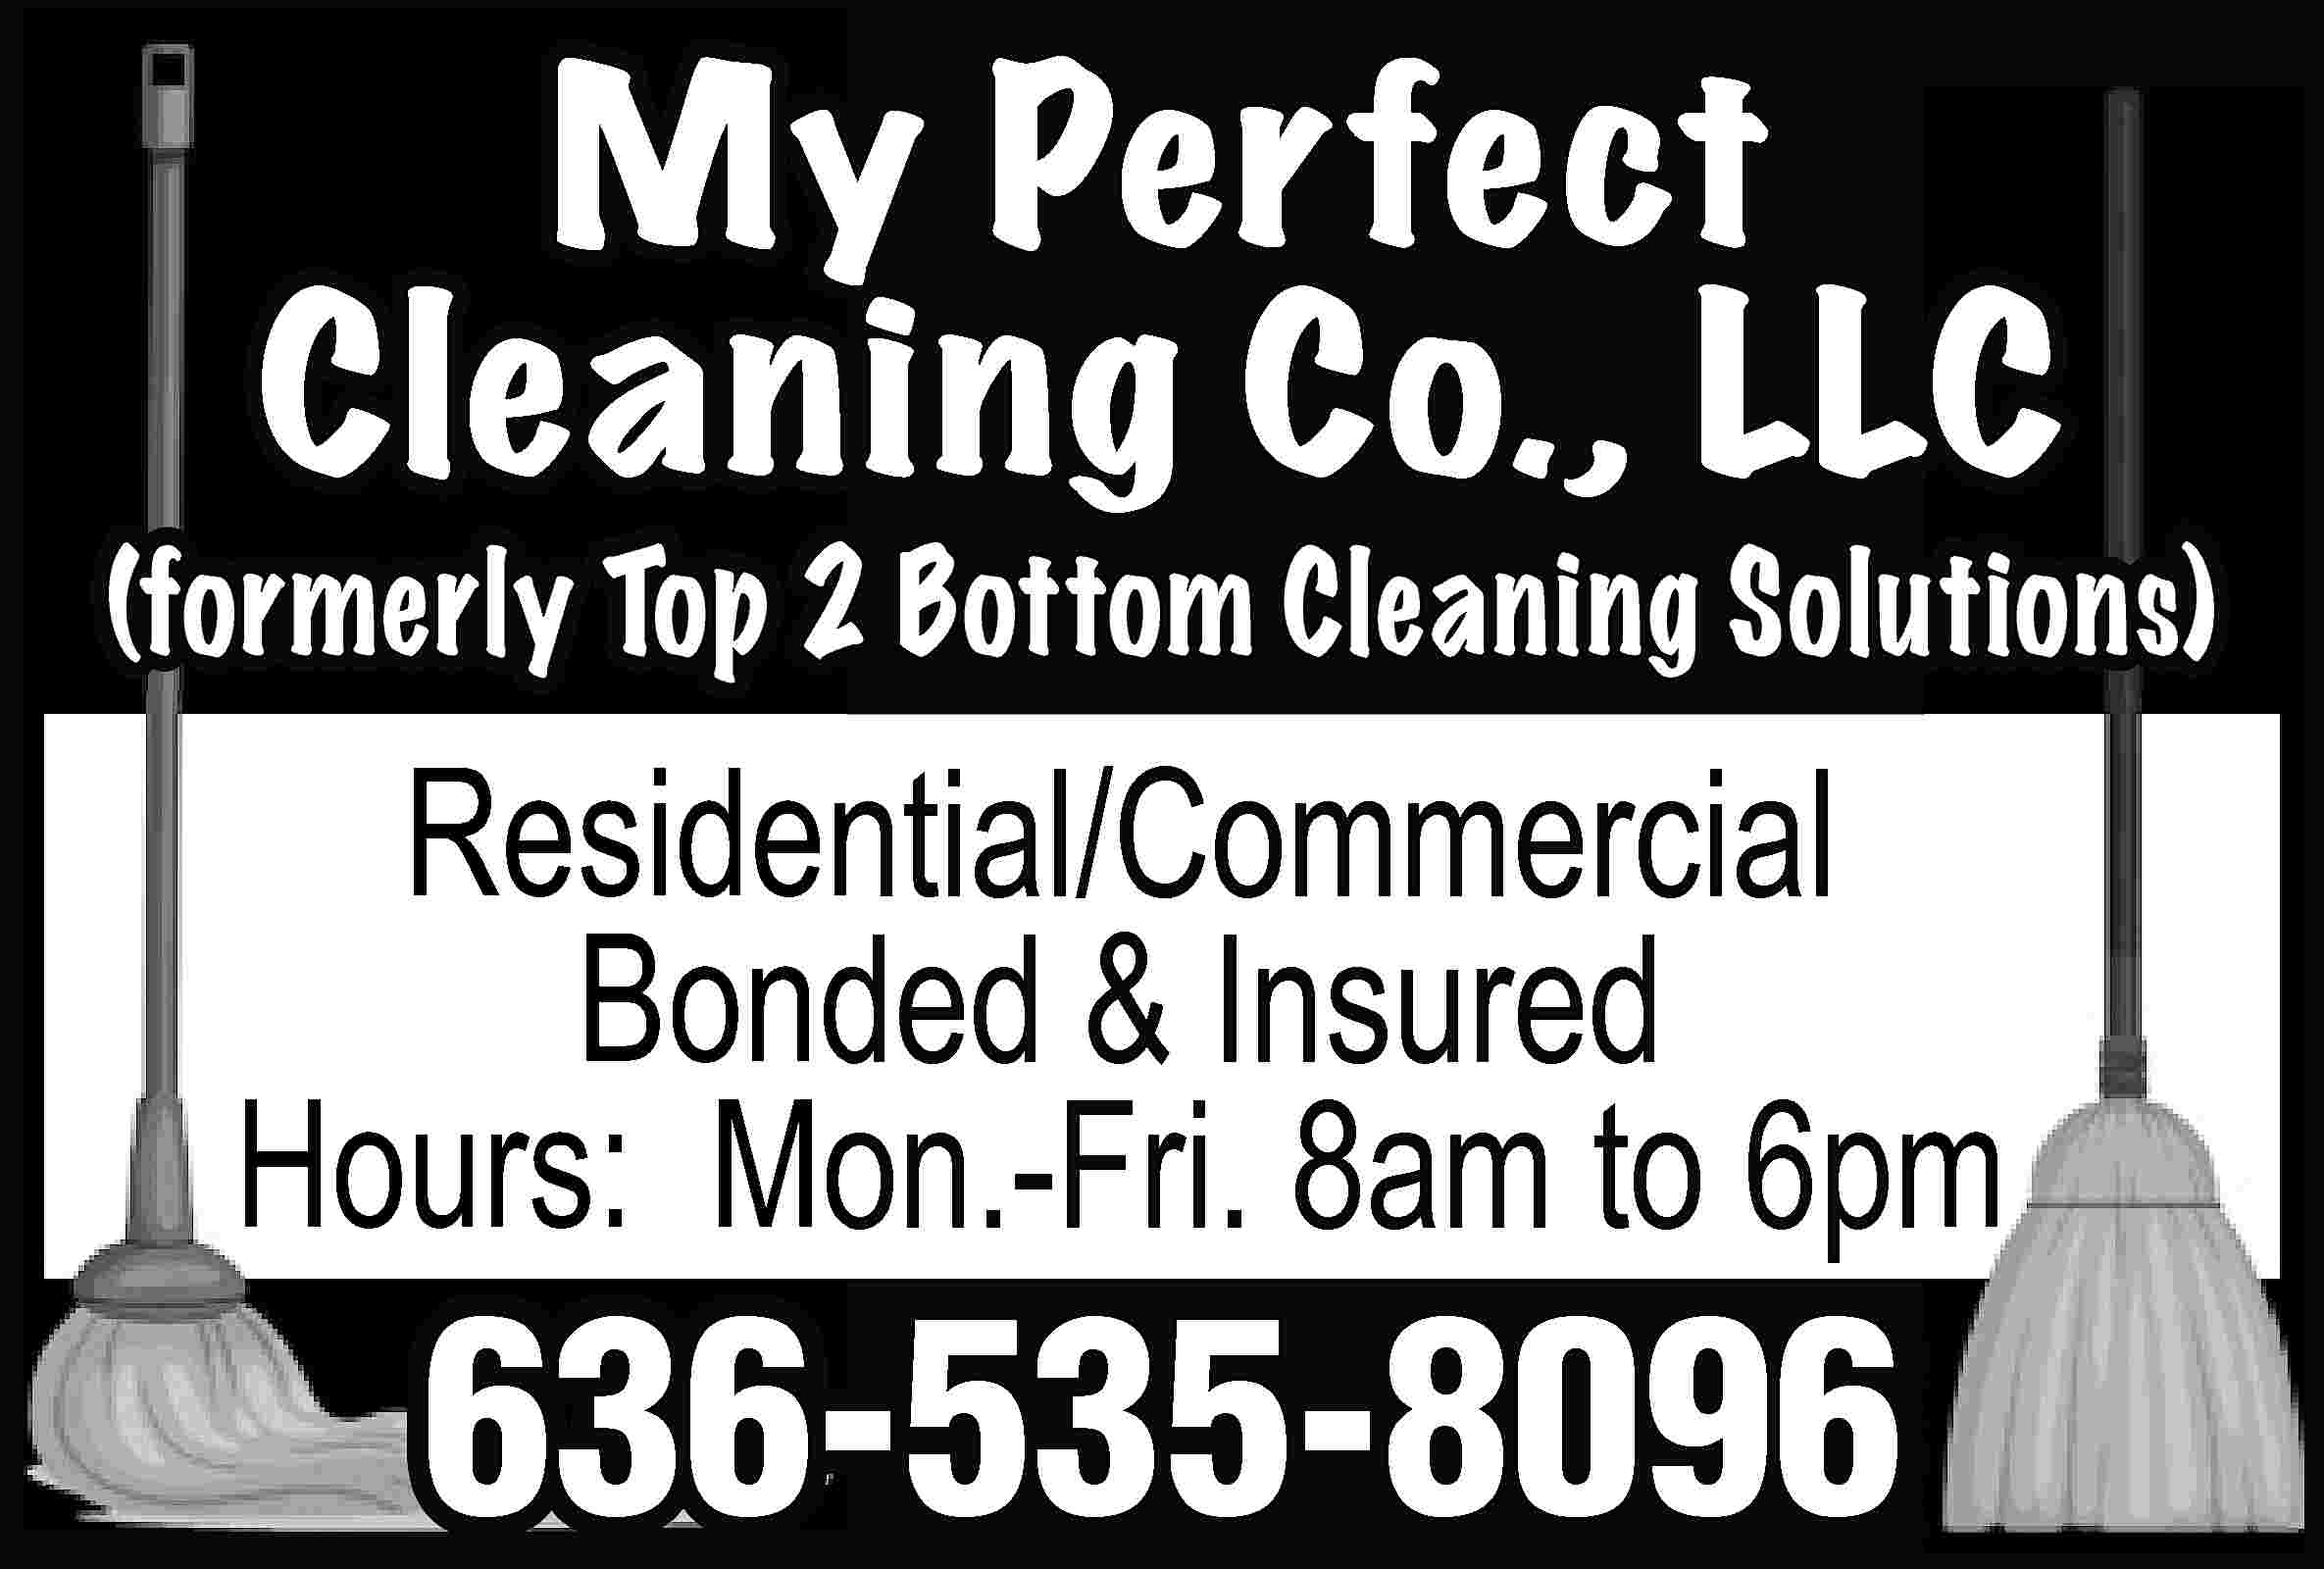 My Perfect Cleaning Co., LLC  My Perfect Cleaning Co., LLC (formerly Top 2 Bottom Cleaning Solutions) Residential/Commercial Bonded & Insured Hours: Mon.-Fri. 8am to 6pm 636-535-8096